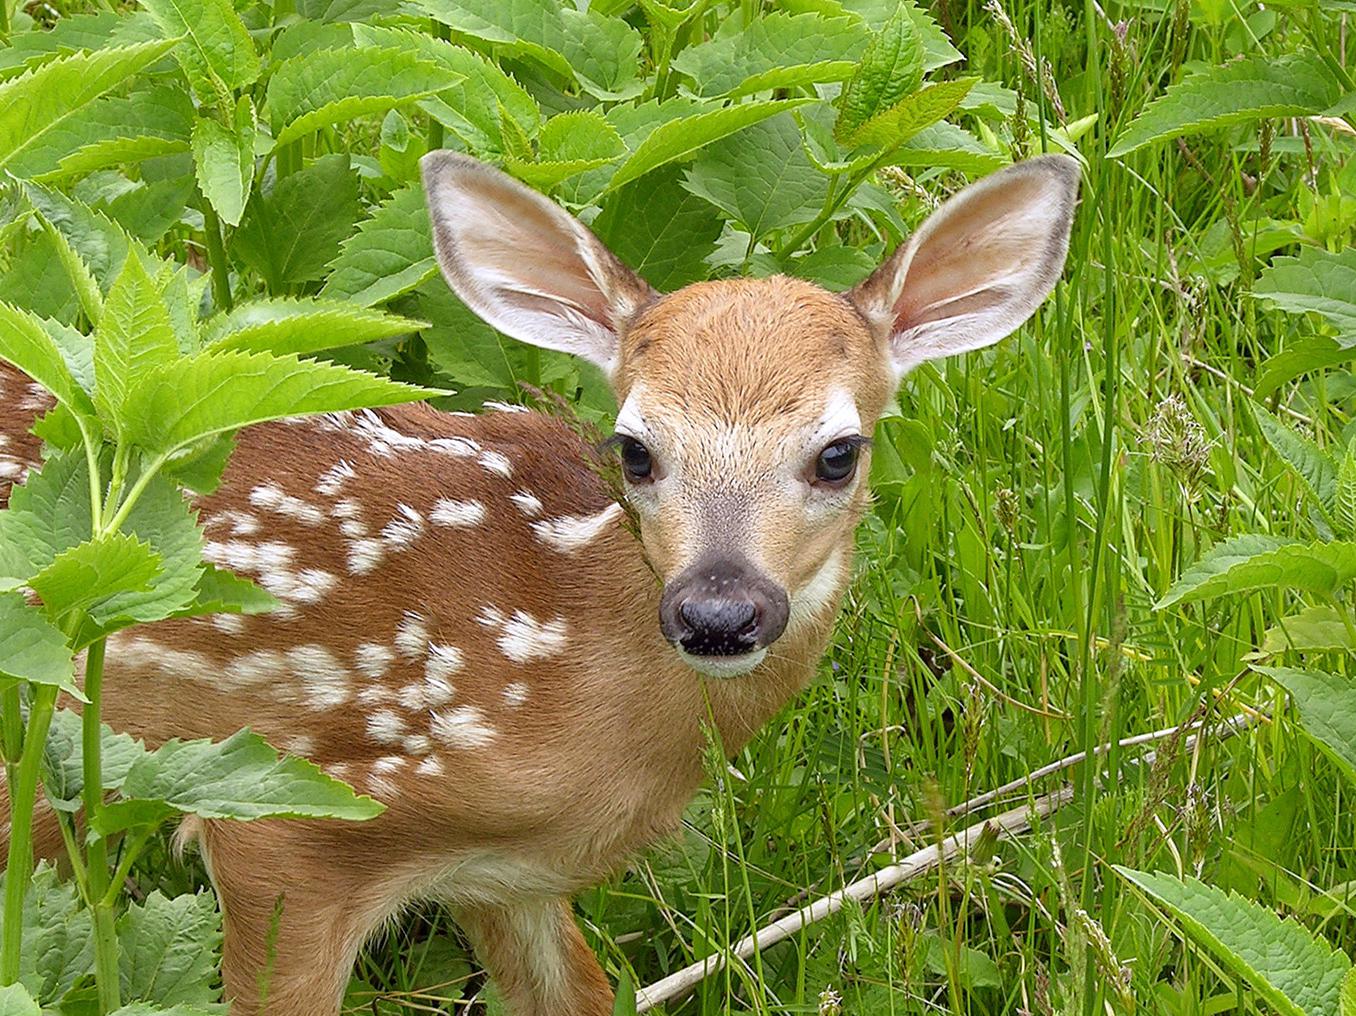 A stray fawn may look vulnerable and alone, but the mother is usually nearby keeping a watchful eye on her offspring. (Stock photo)